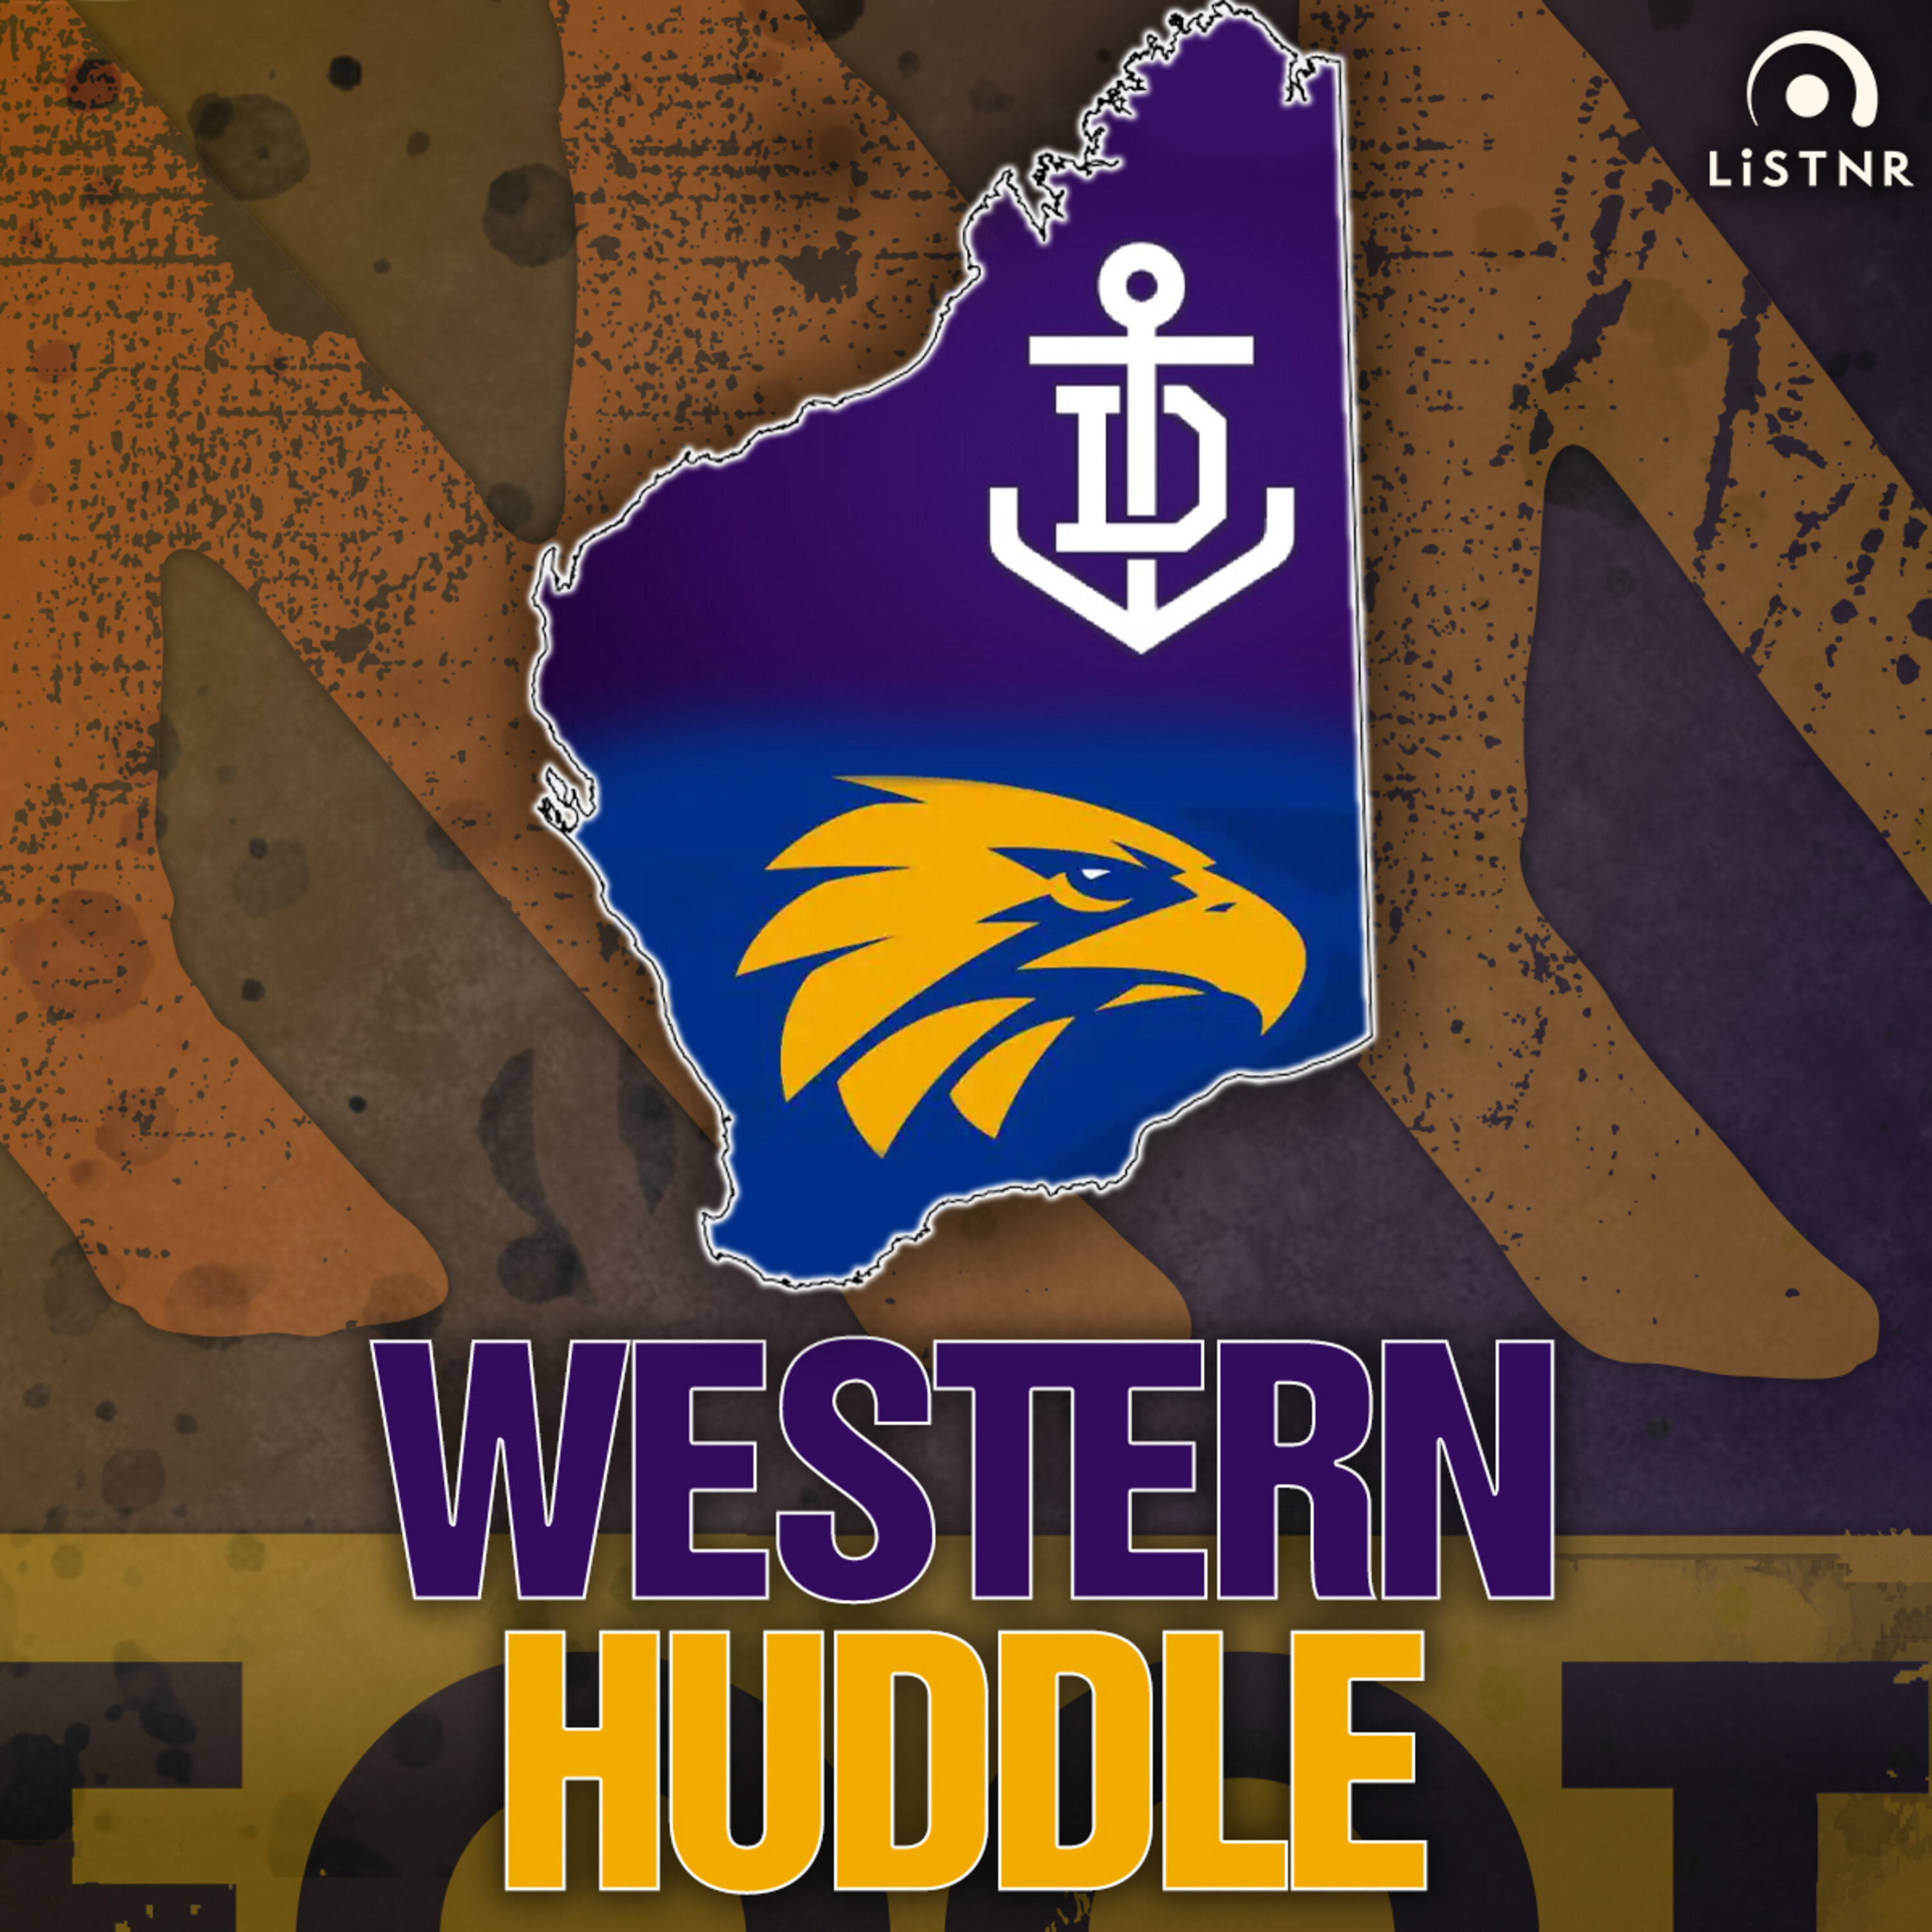 Western Huddle | Hard road ahead for Freo and the Eagles, have the Dockers got their game plan wrong, Embers reckons West Coast will win the derby